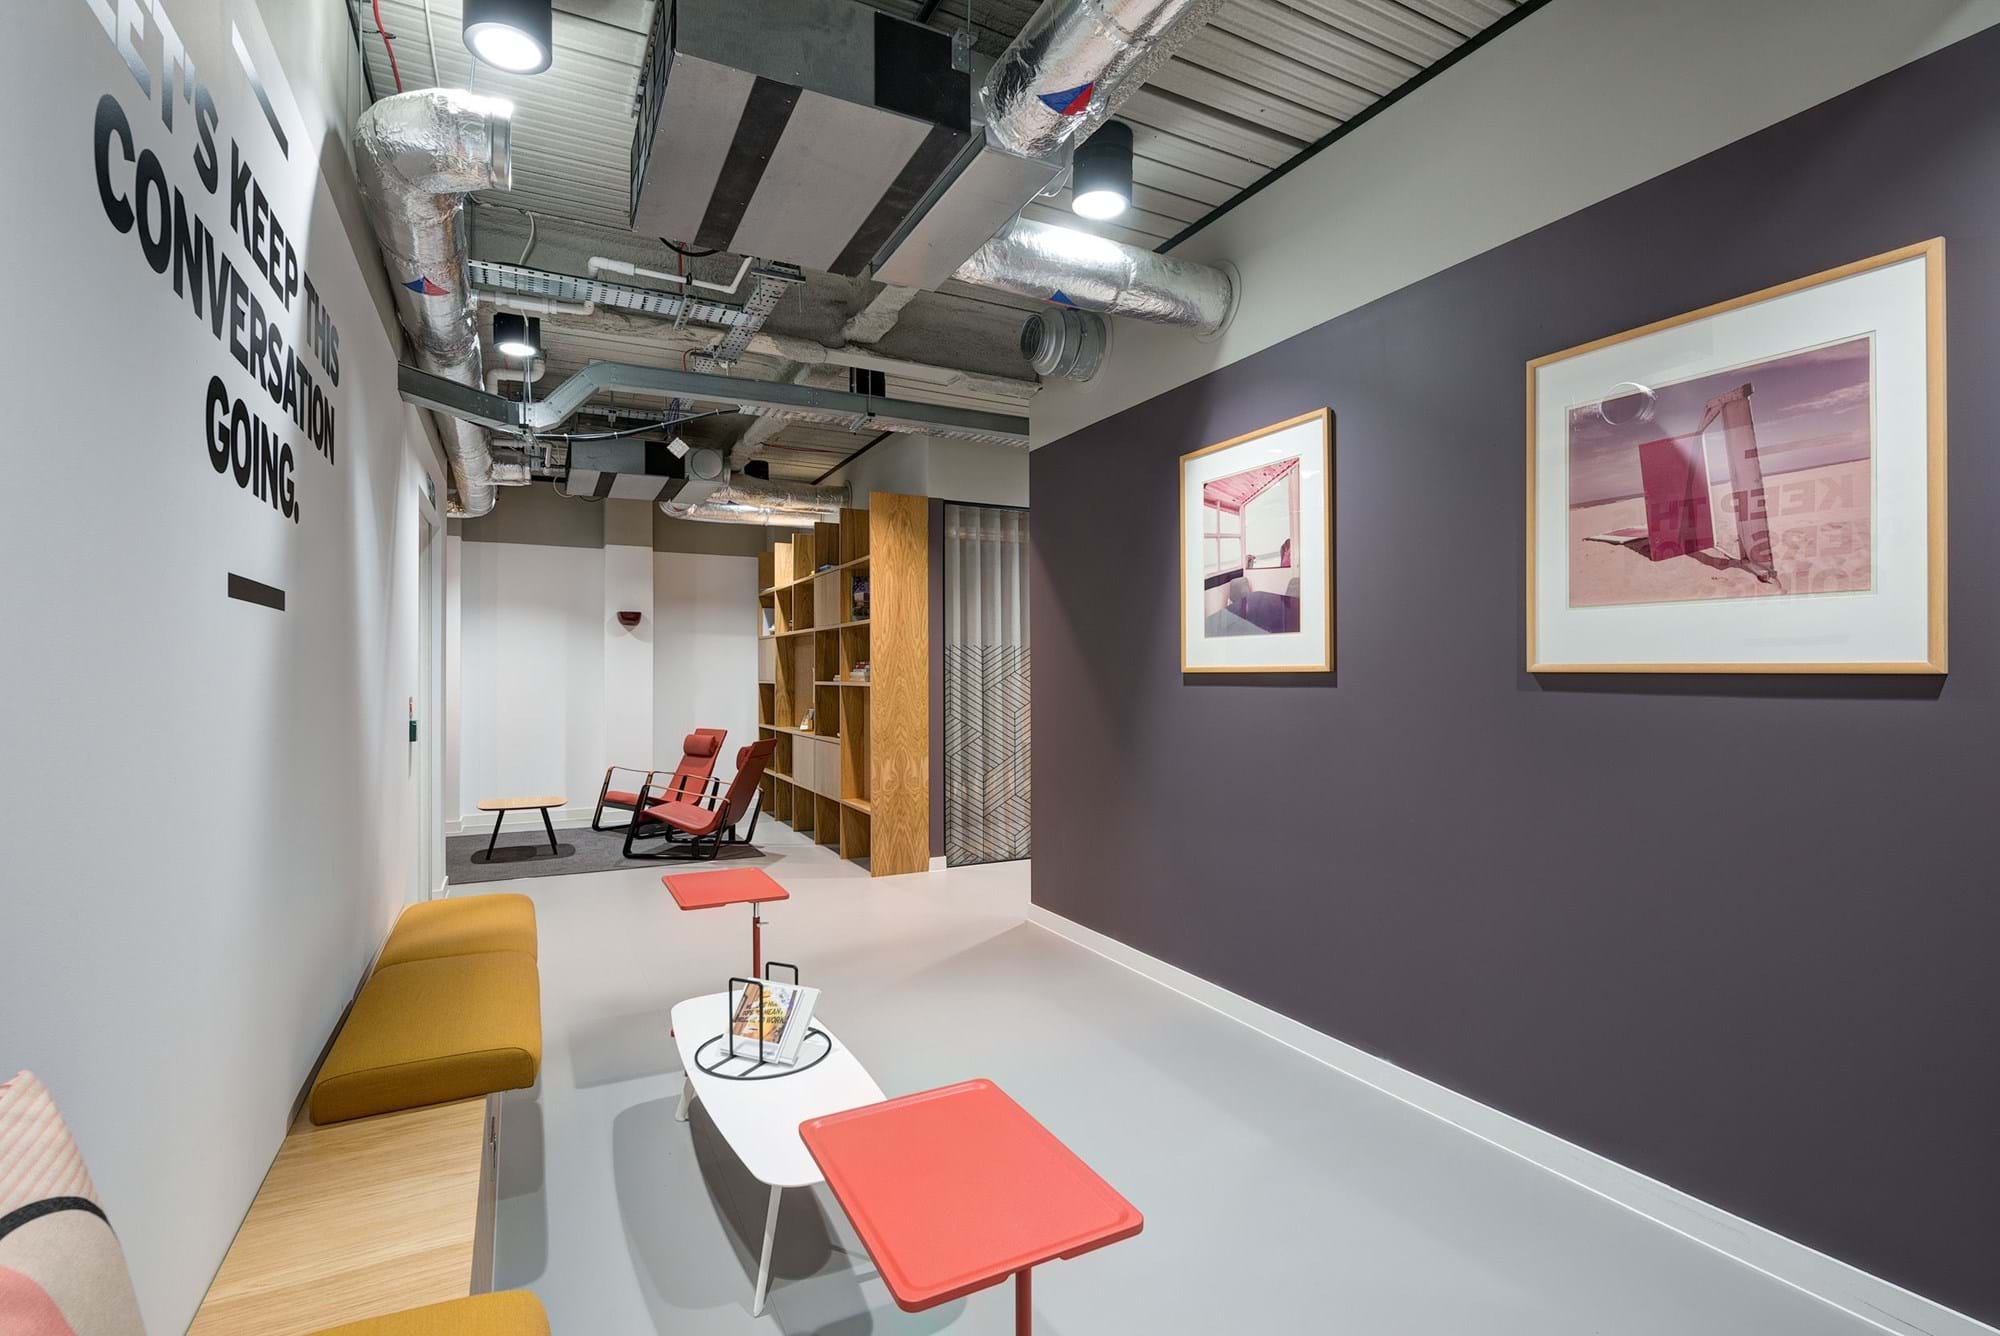 Modus Workspace office design, fit out and refurbishment - Spaces - Moorgate, London - Spaces Moorgate 09 highres sRGB.jpg